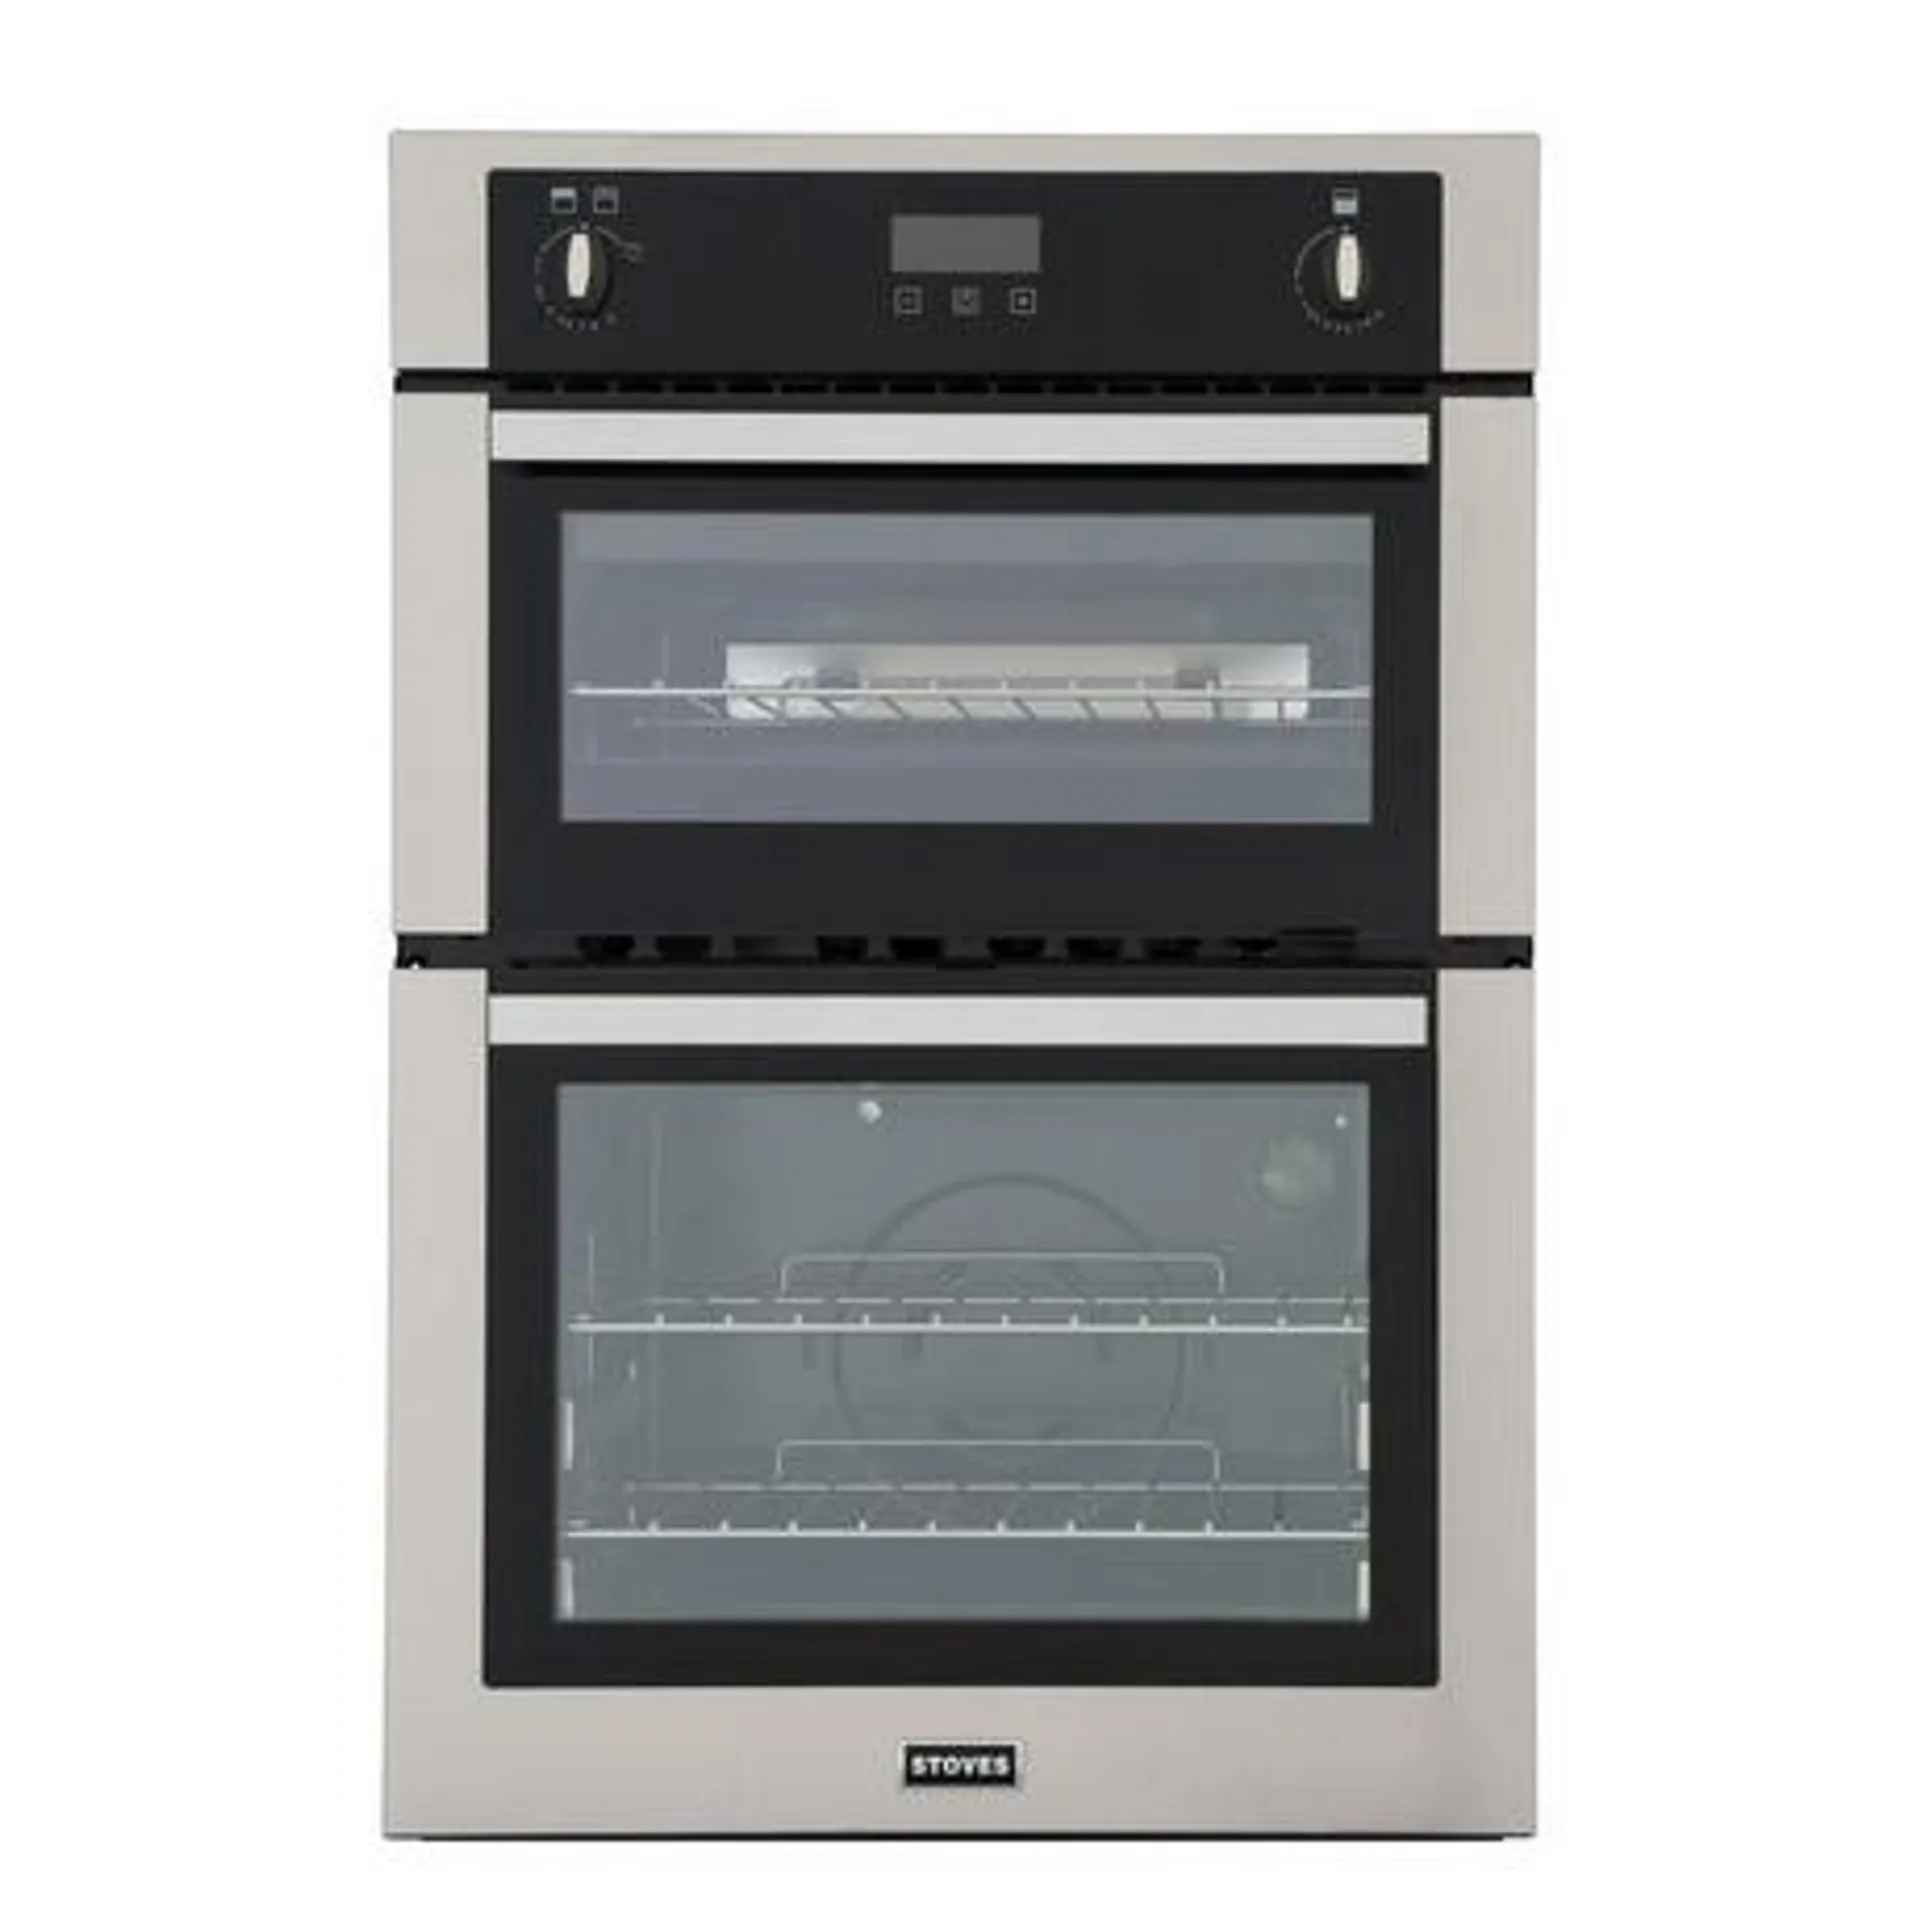 Stoves 444444843 BI900G Built In Gas Double Oven